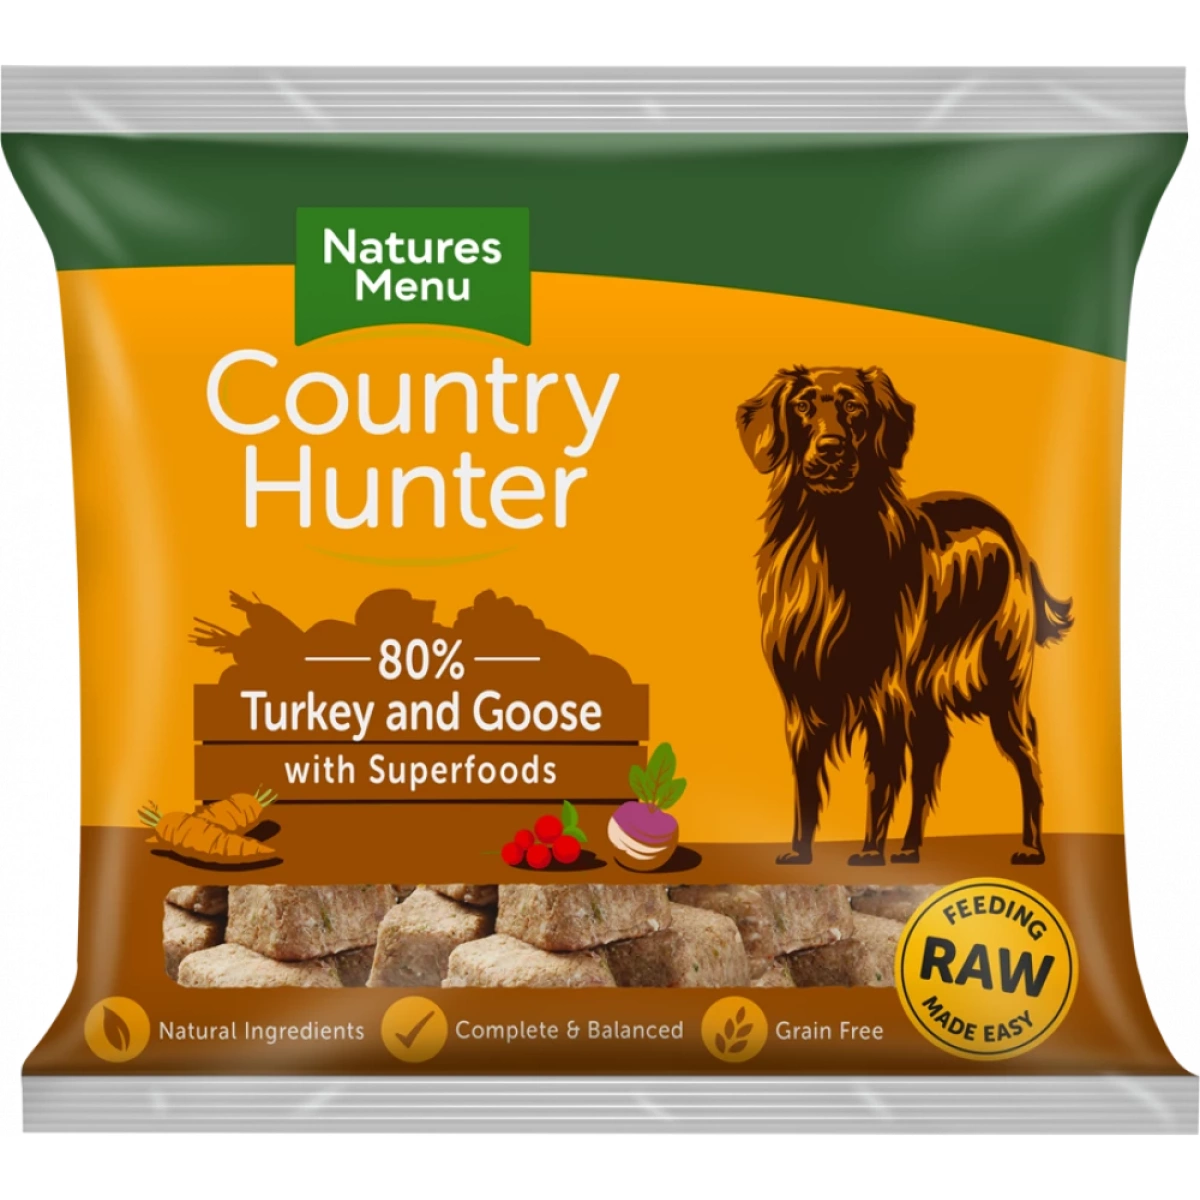 Country Hunter Nuggets 1kg - Turkey & Goose Main Image